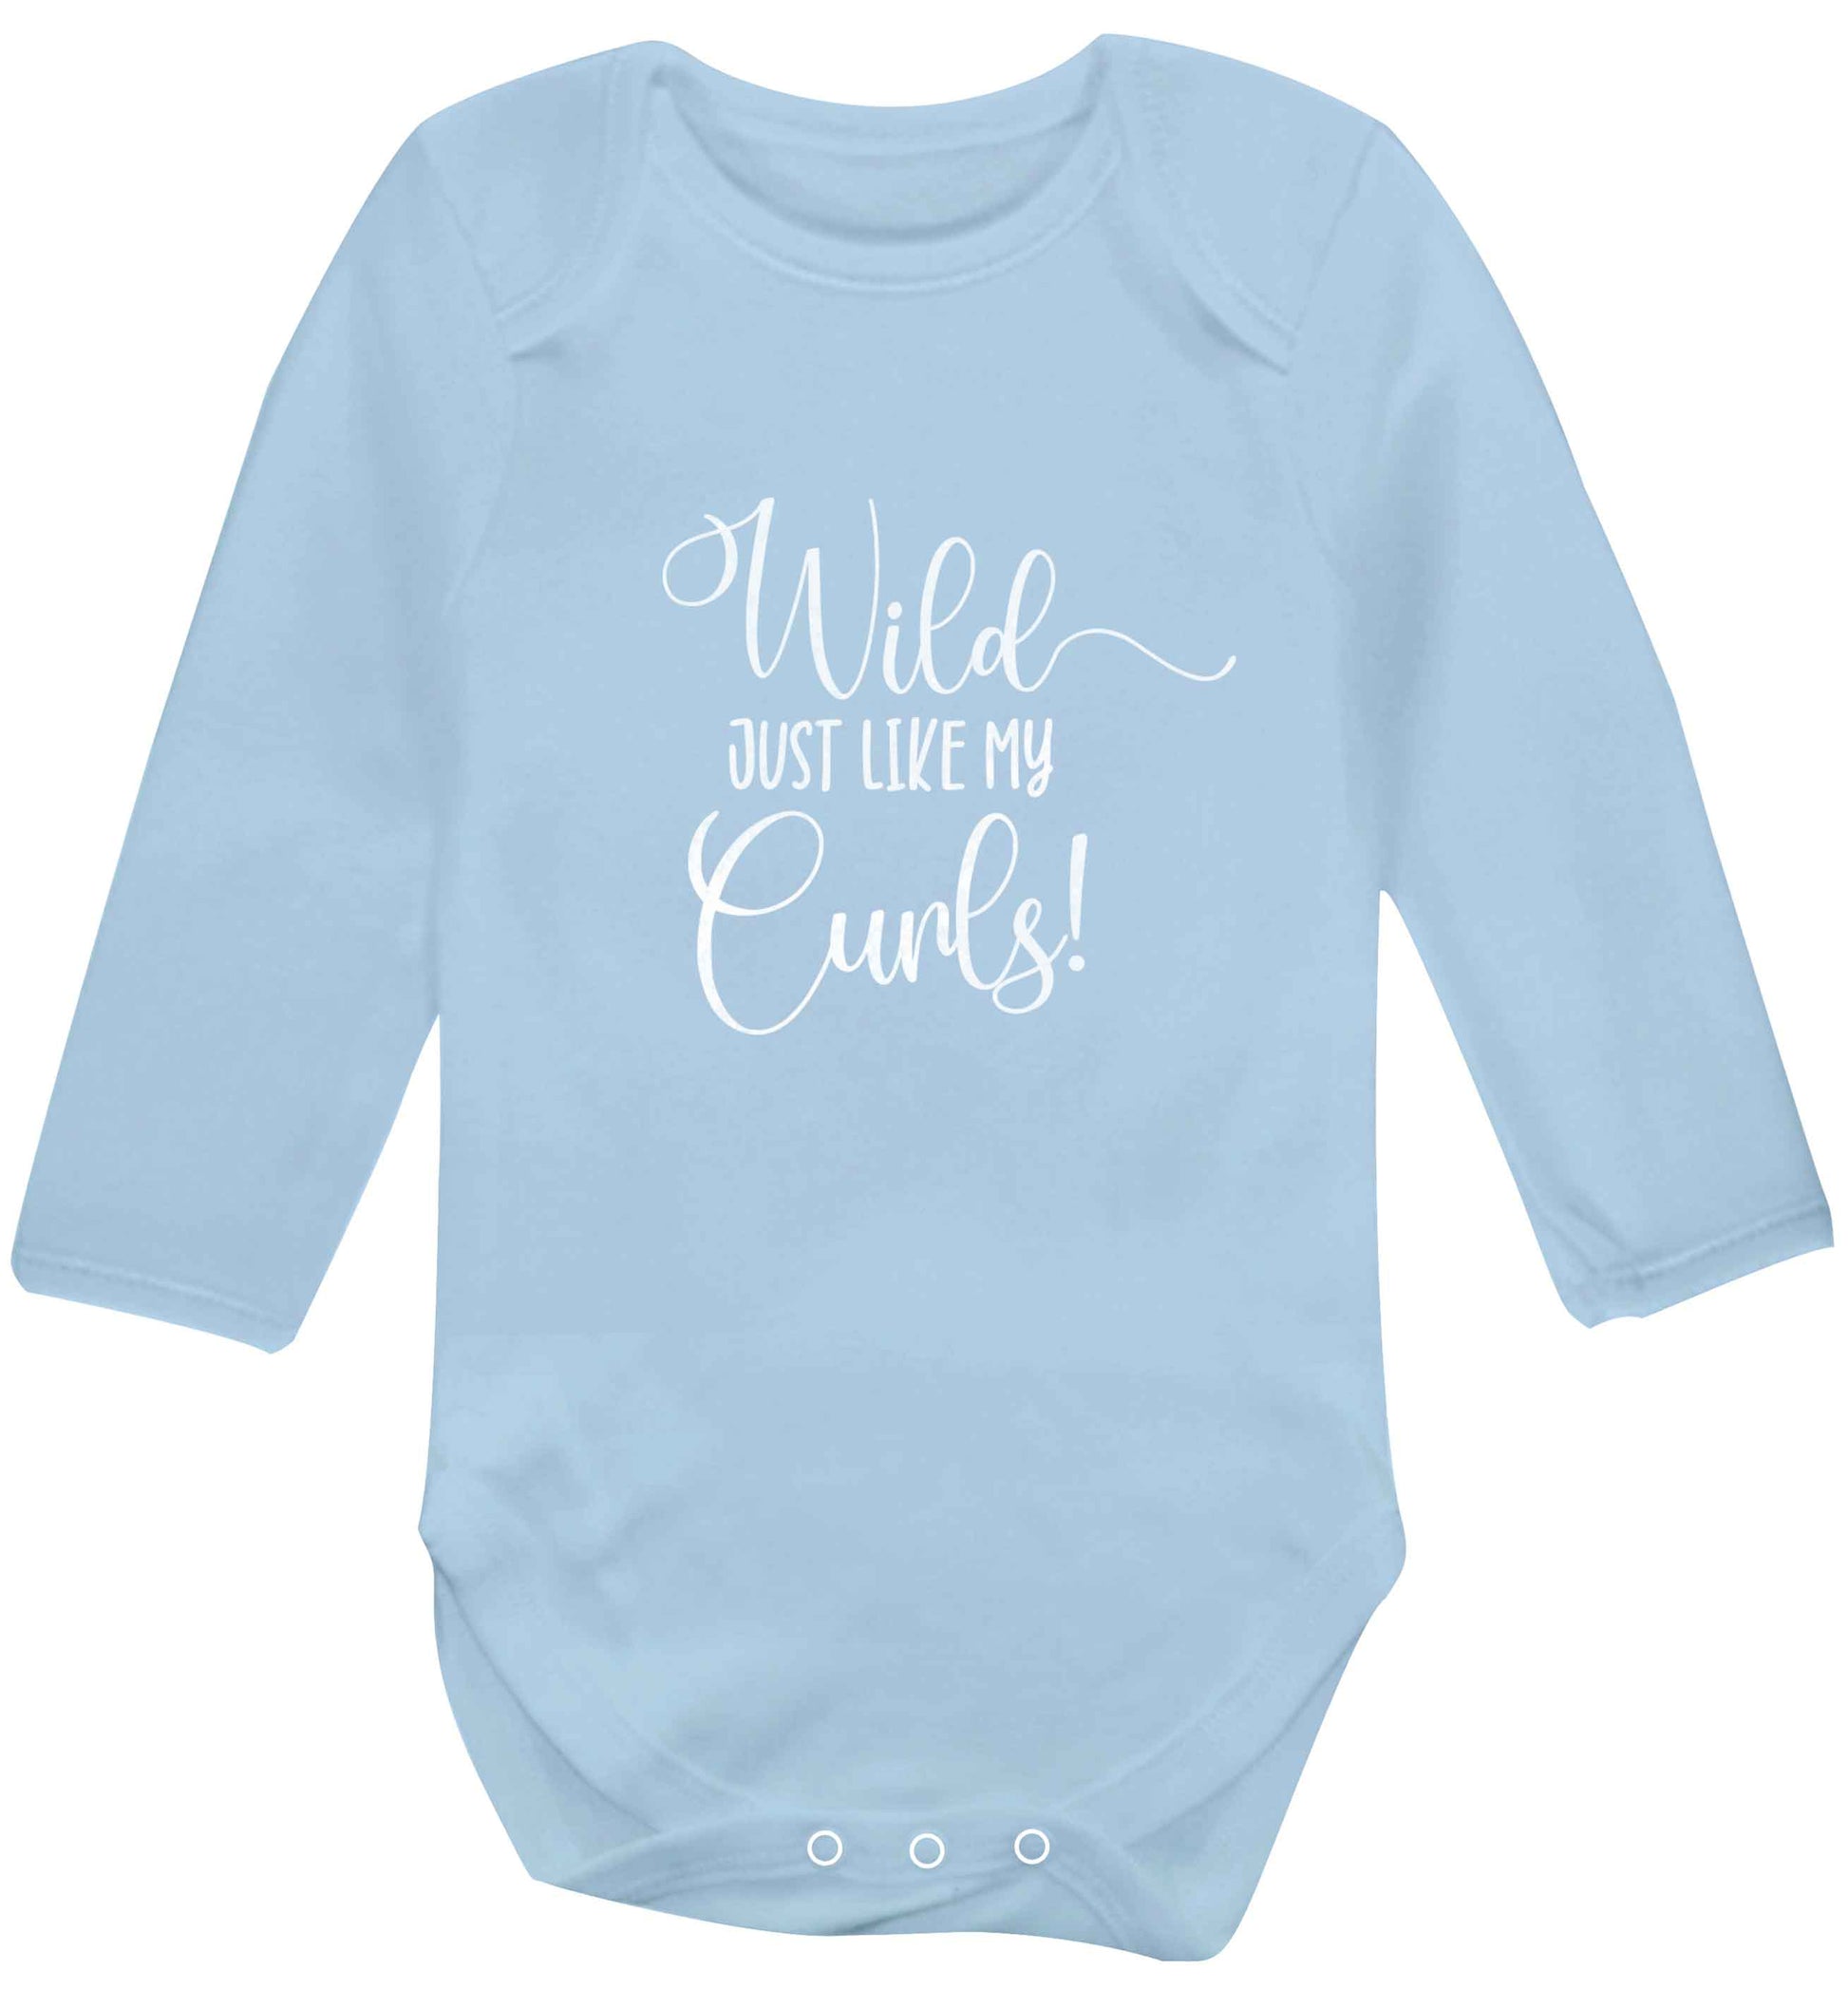 Wild just like my curls baby vest long sleeved pale blue 6-12 months